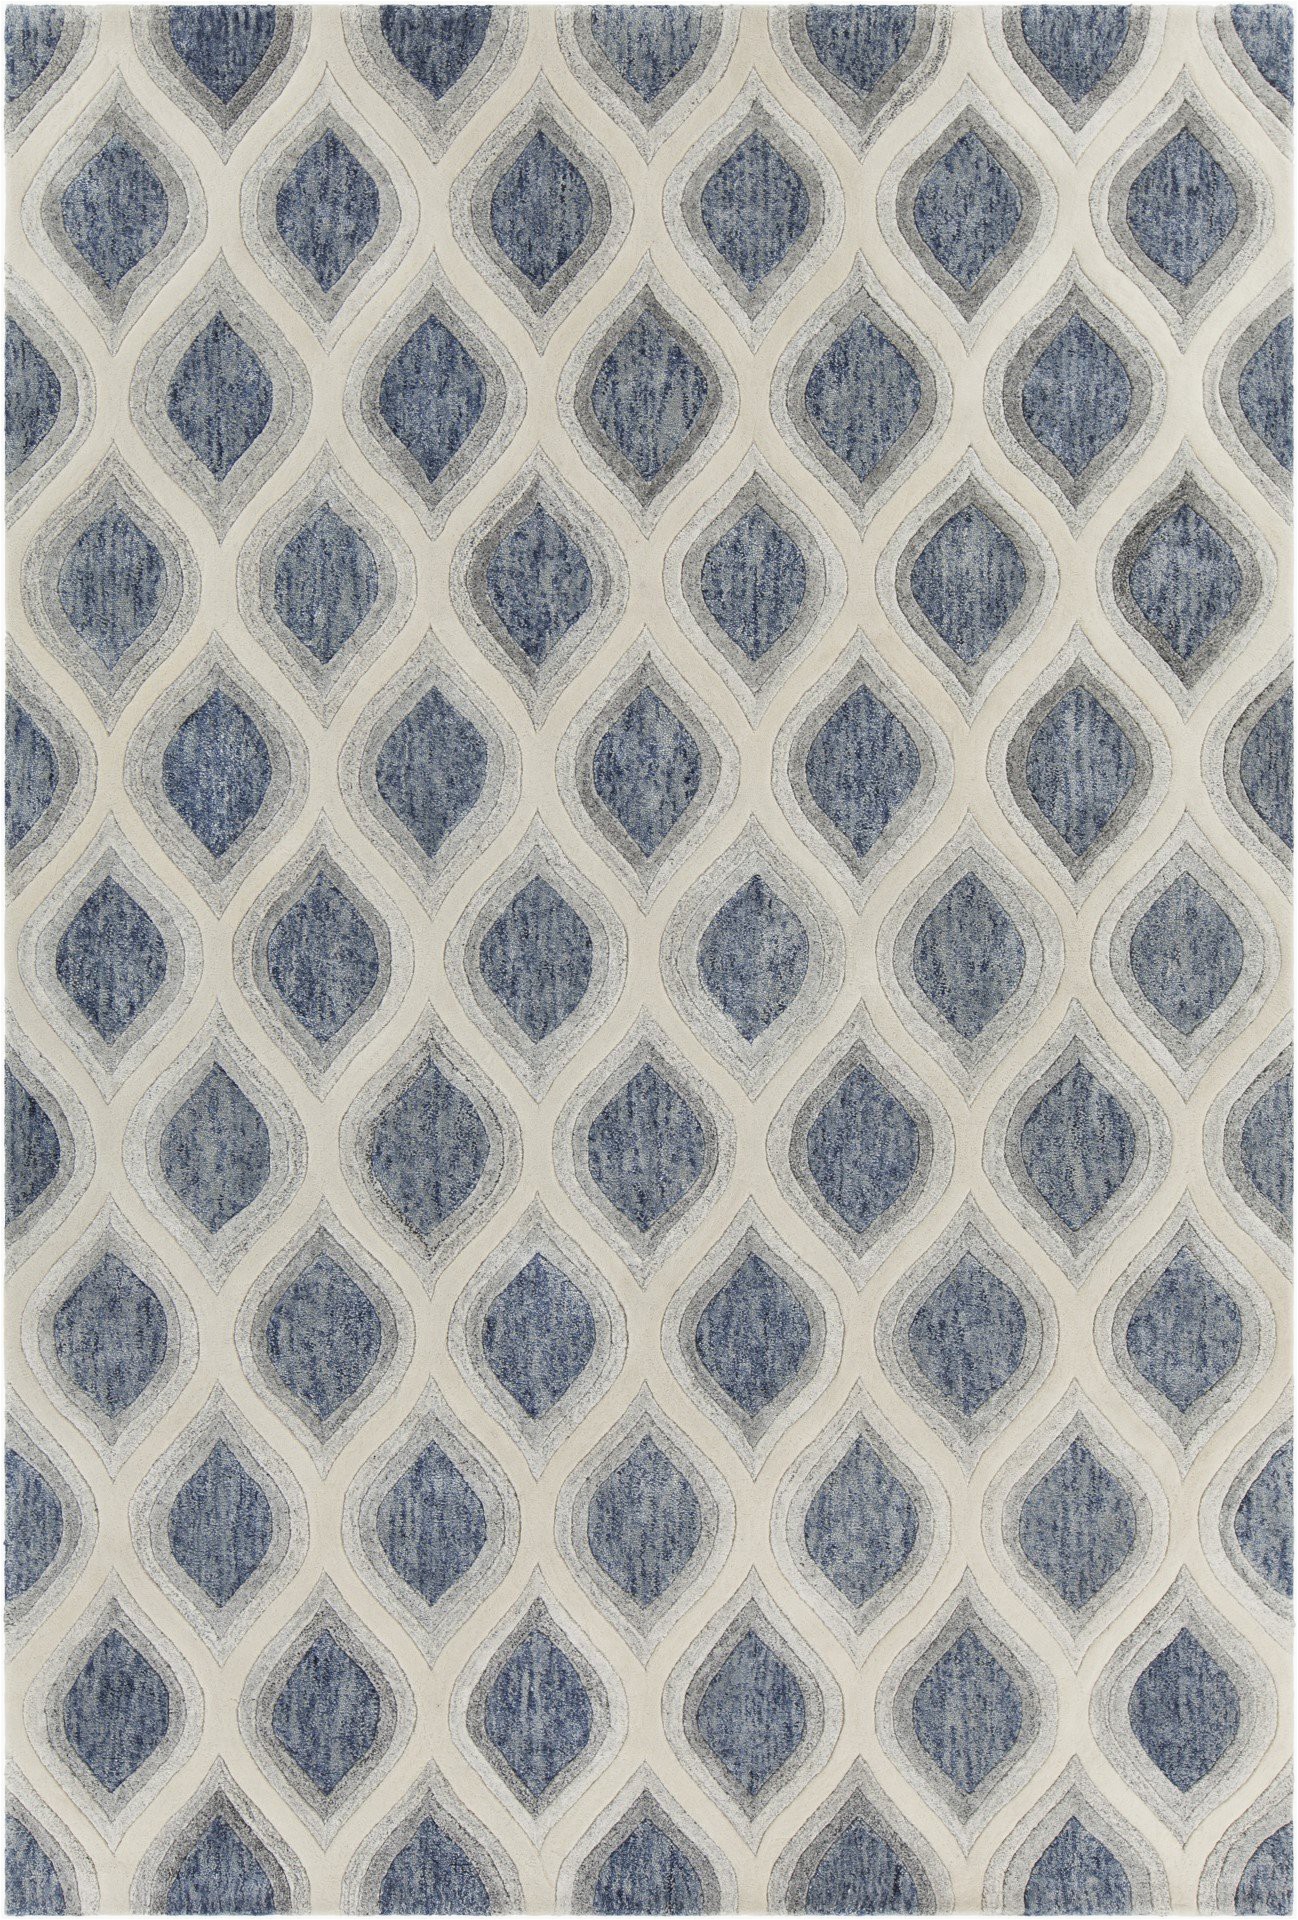 Rugs for Sale Blue Clara Collection Hand Tufted area Rug In Blue Grey & White